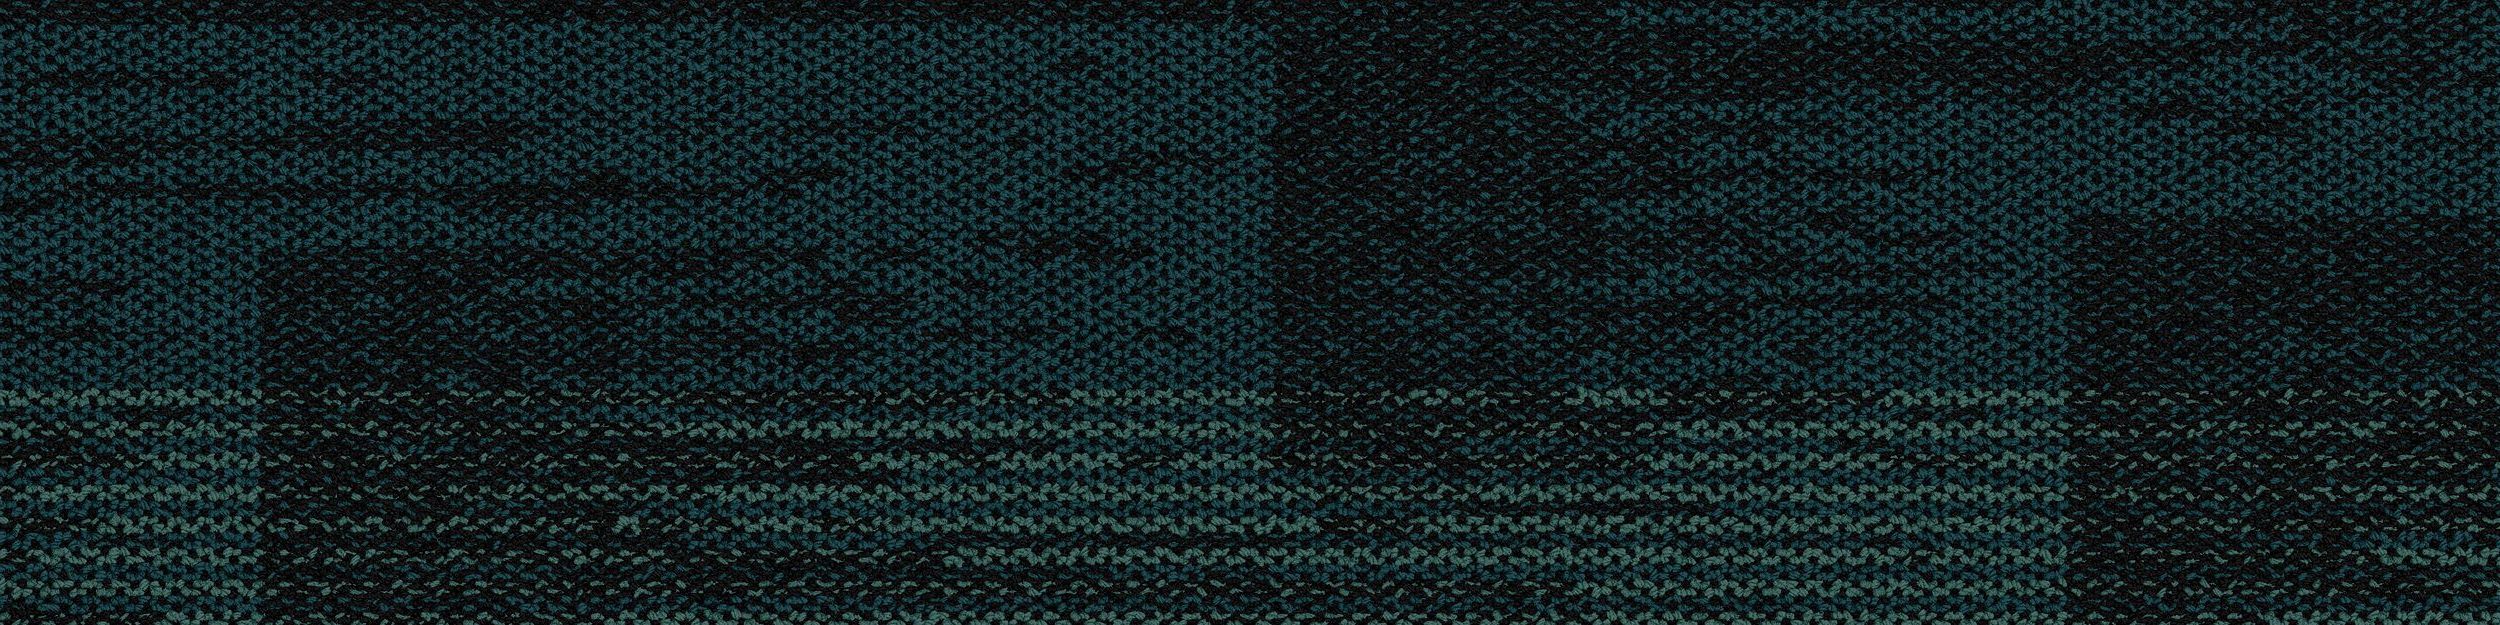 AE317 Carpet Tile In Emerald image number 2